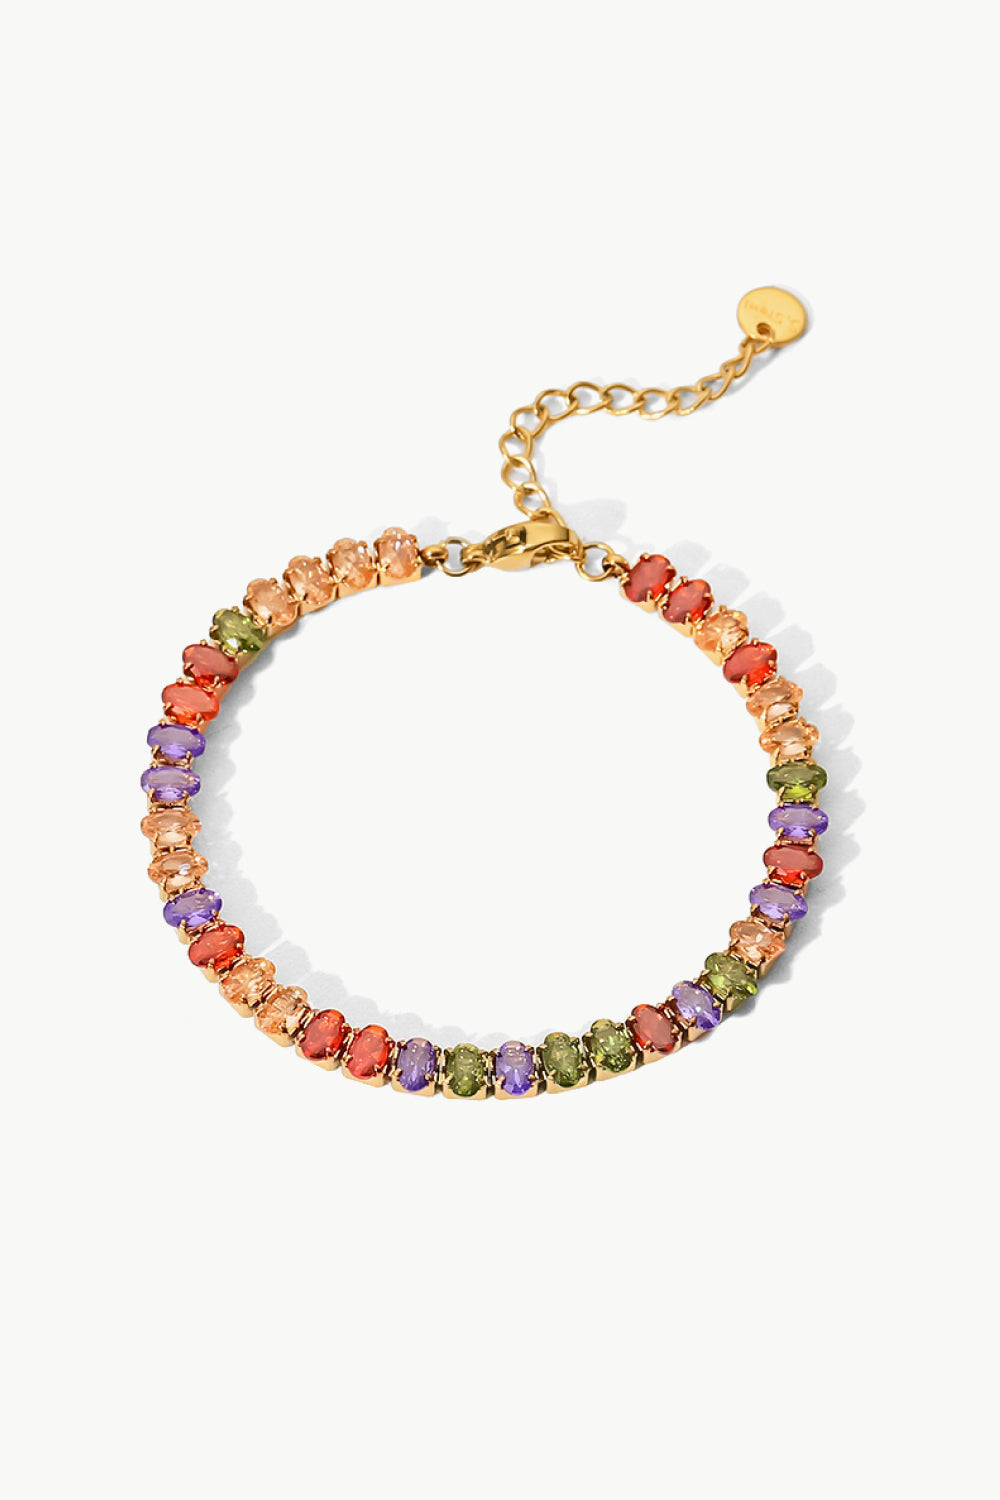 18K Gold Plated Multicolored Zircon Bracelet - Kawaii Stop - 18K Gold Plated, Bracelet, Bracelets, Elegant Jewelry, Imported, Jack&Din, Multicolored Zircon Bracelet, Premium Material, Ship From Overseas